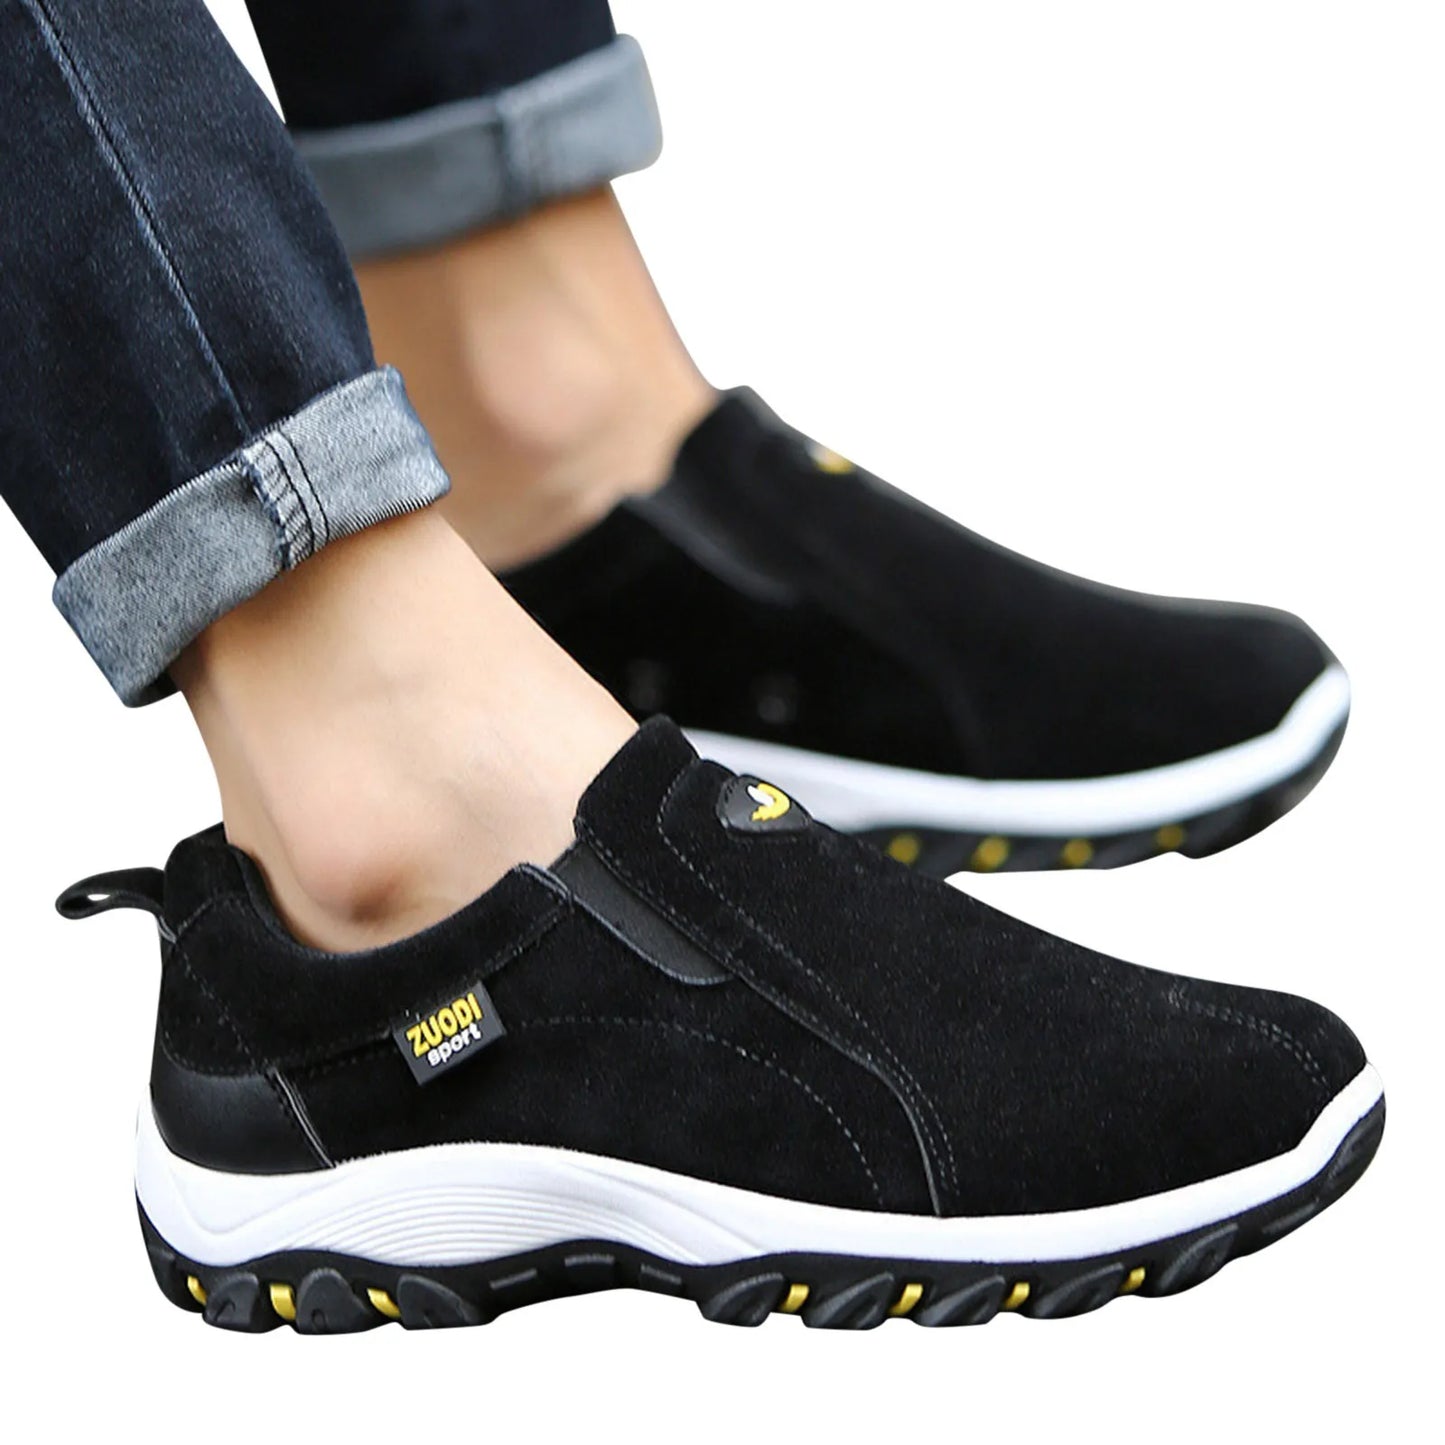 New Casual Shoes Men Sneakers Outdoor Walking Shoes Loafers Simple Comfortable Slip On Lightweight Plus Size Male Footwear